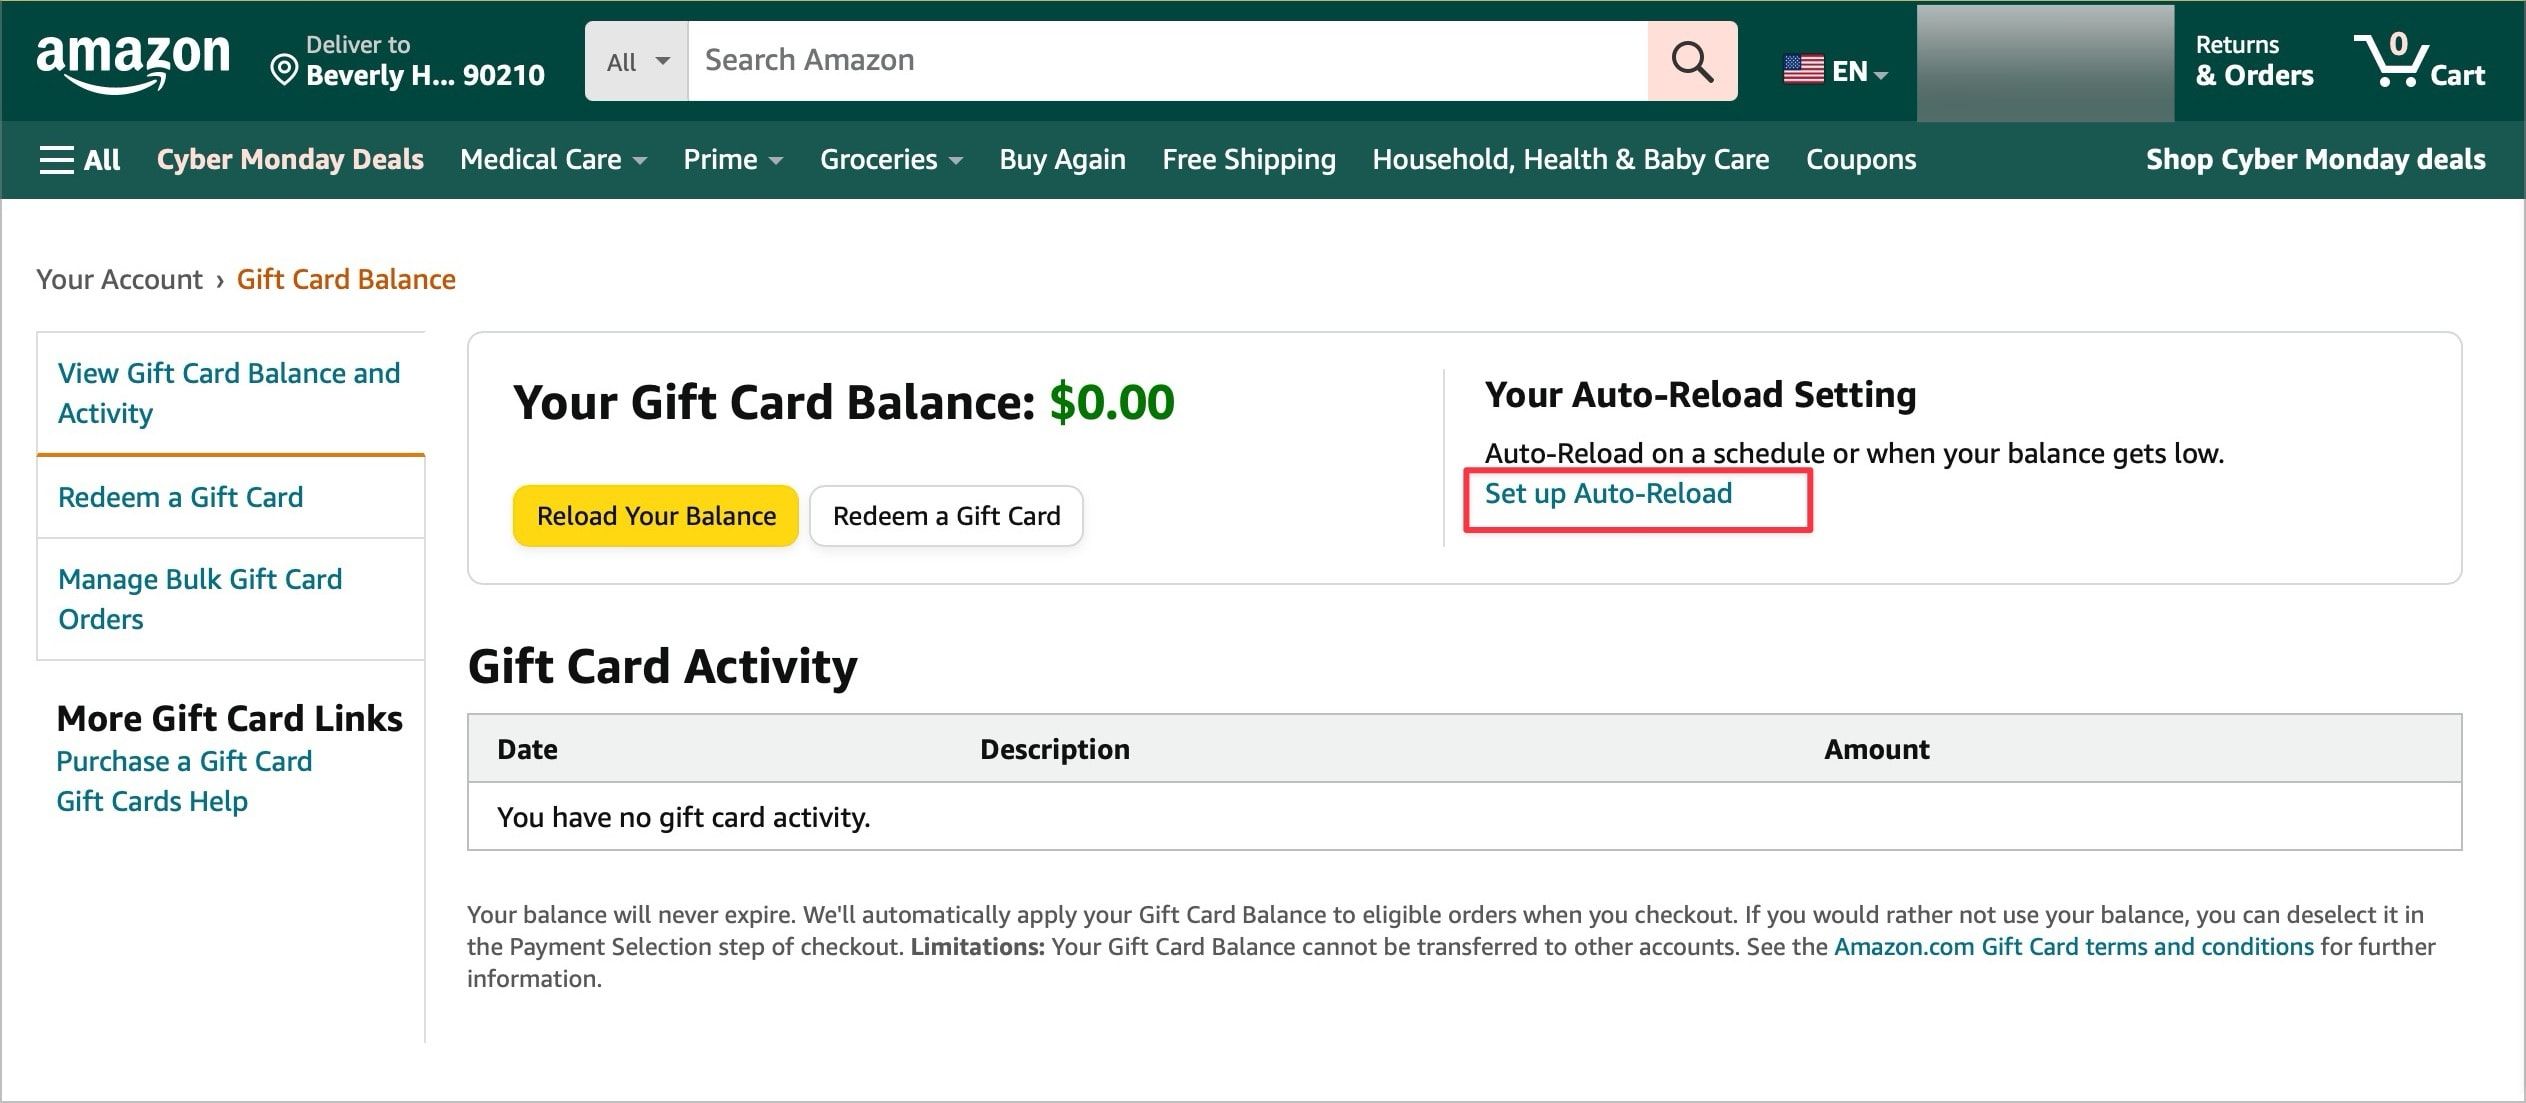 Amazon Gift Card page showing auto-reload option